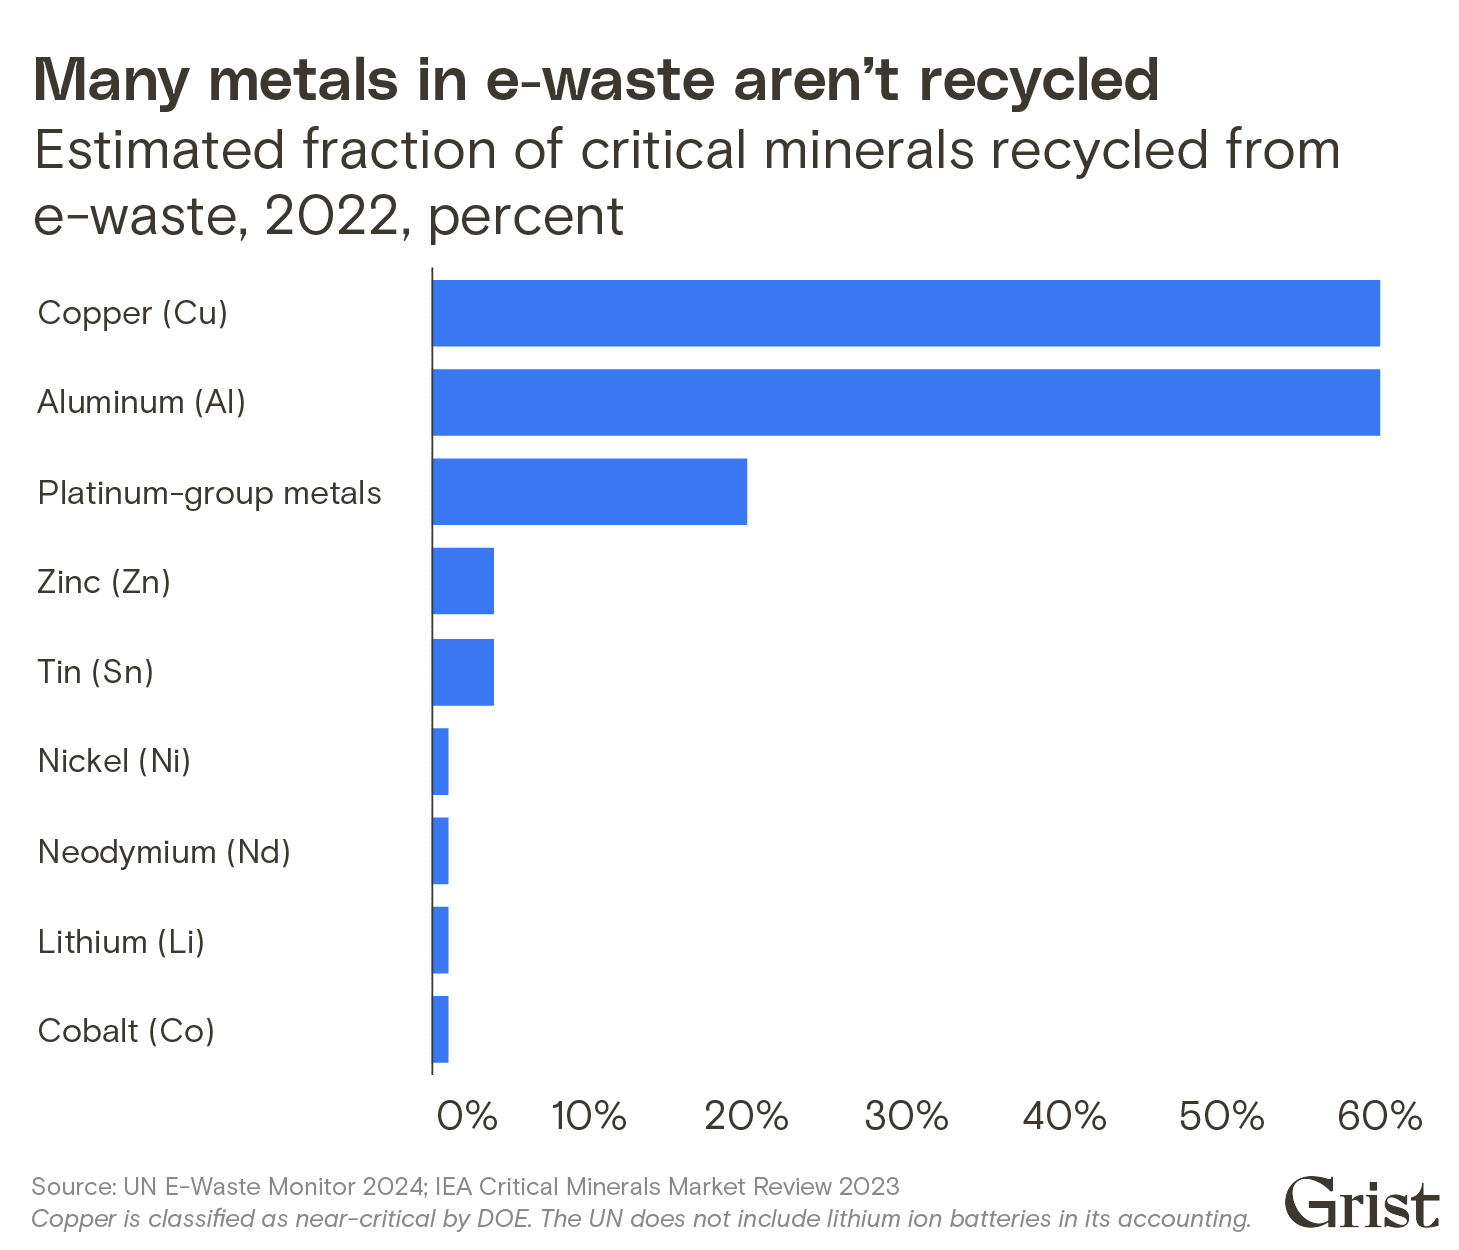 A bar chart illustrating the estimated fraction of critical minerals recycled from e-waste in 2022 (displayed in percent). While metals like copper and aluminum have rates close to 60 percent, metals like nickel and lithium have rates less than 1 percent.